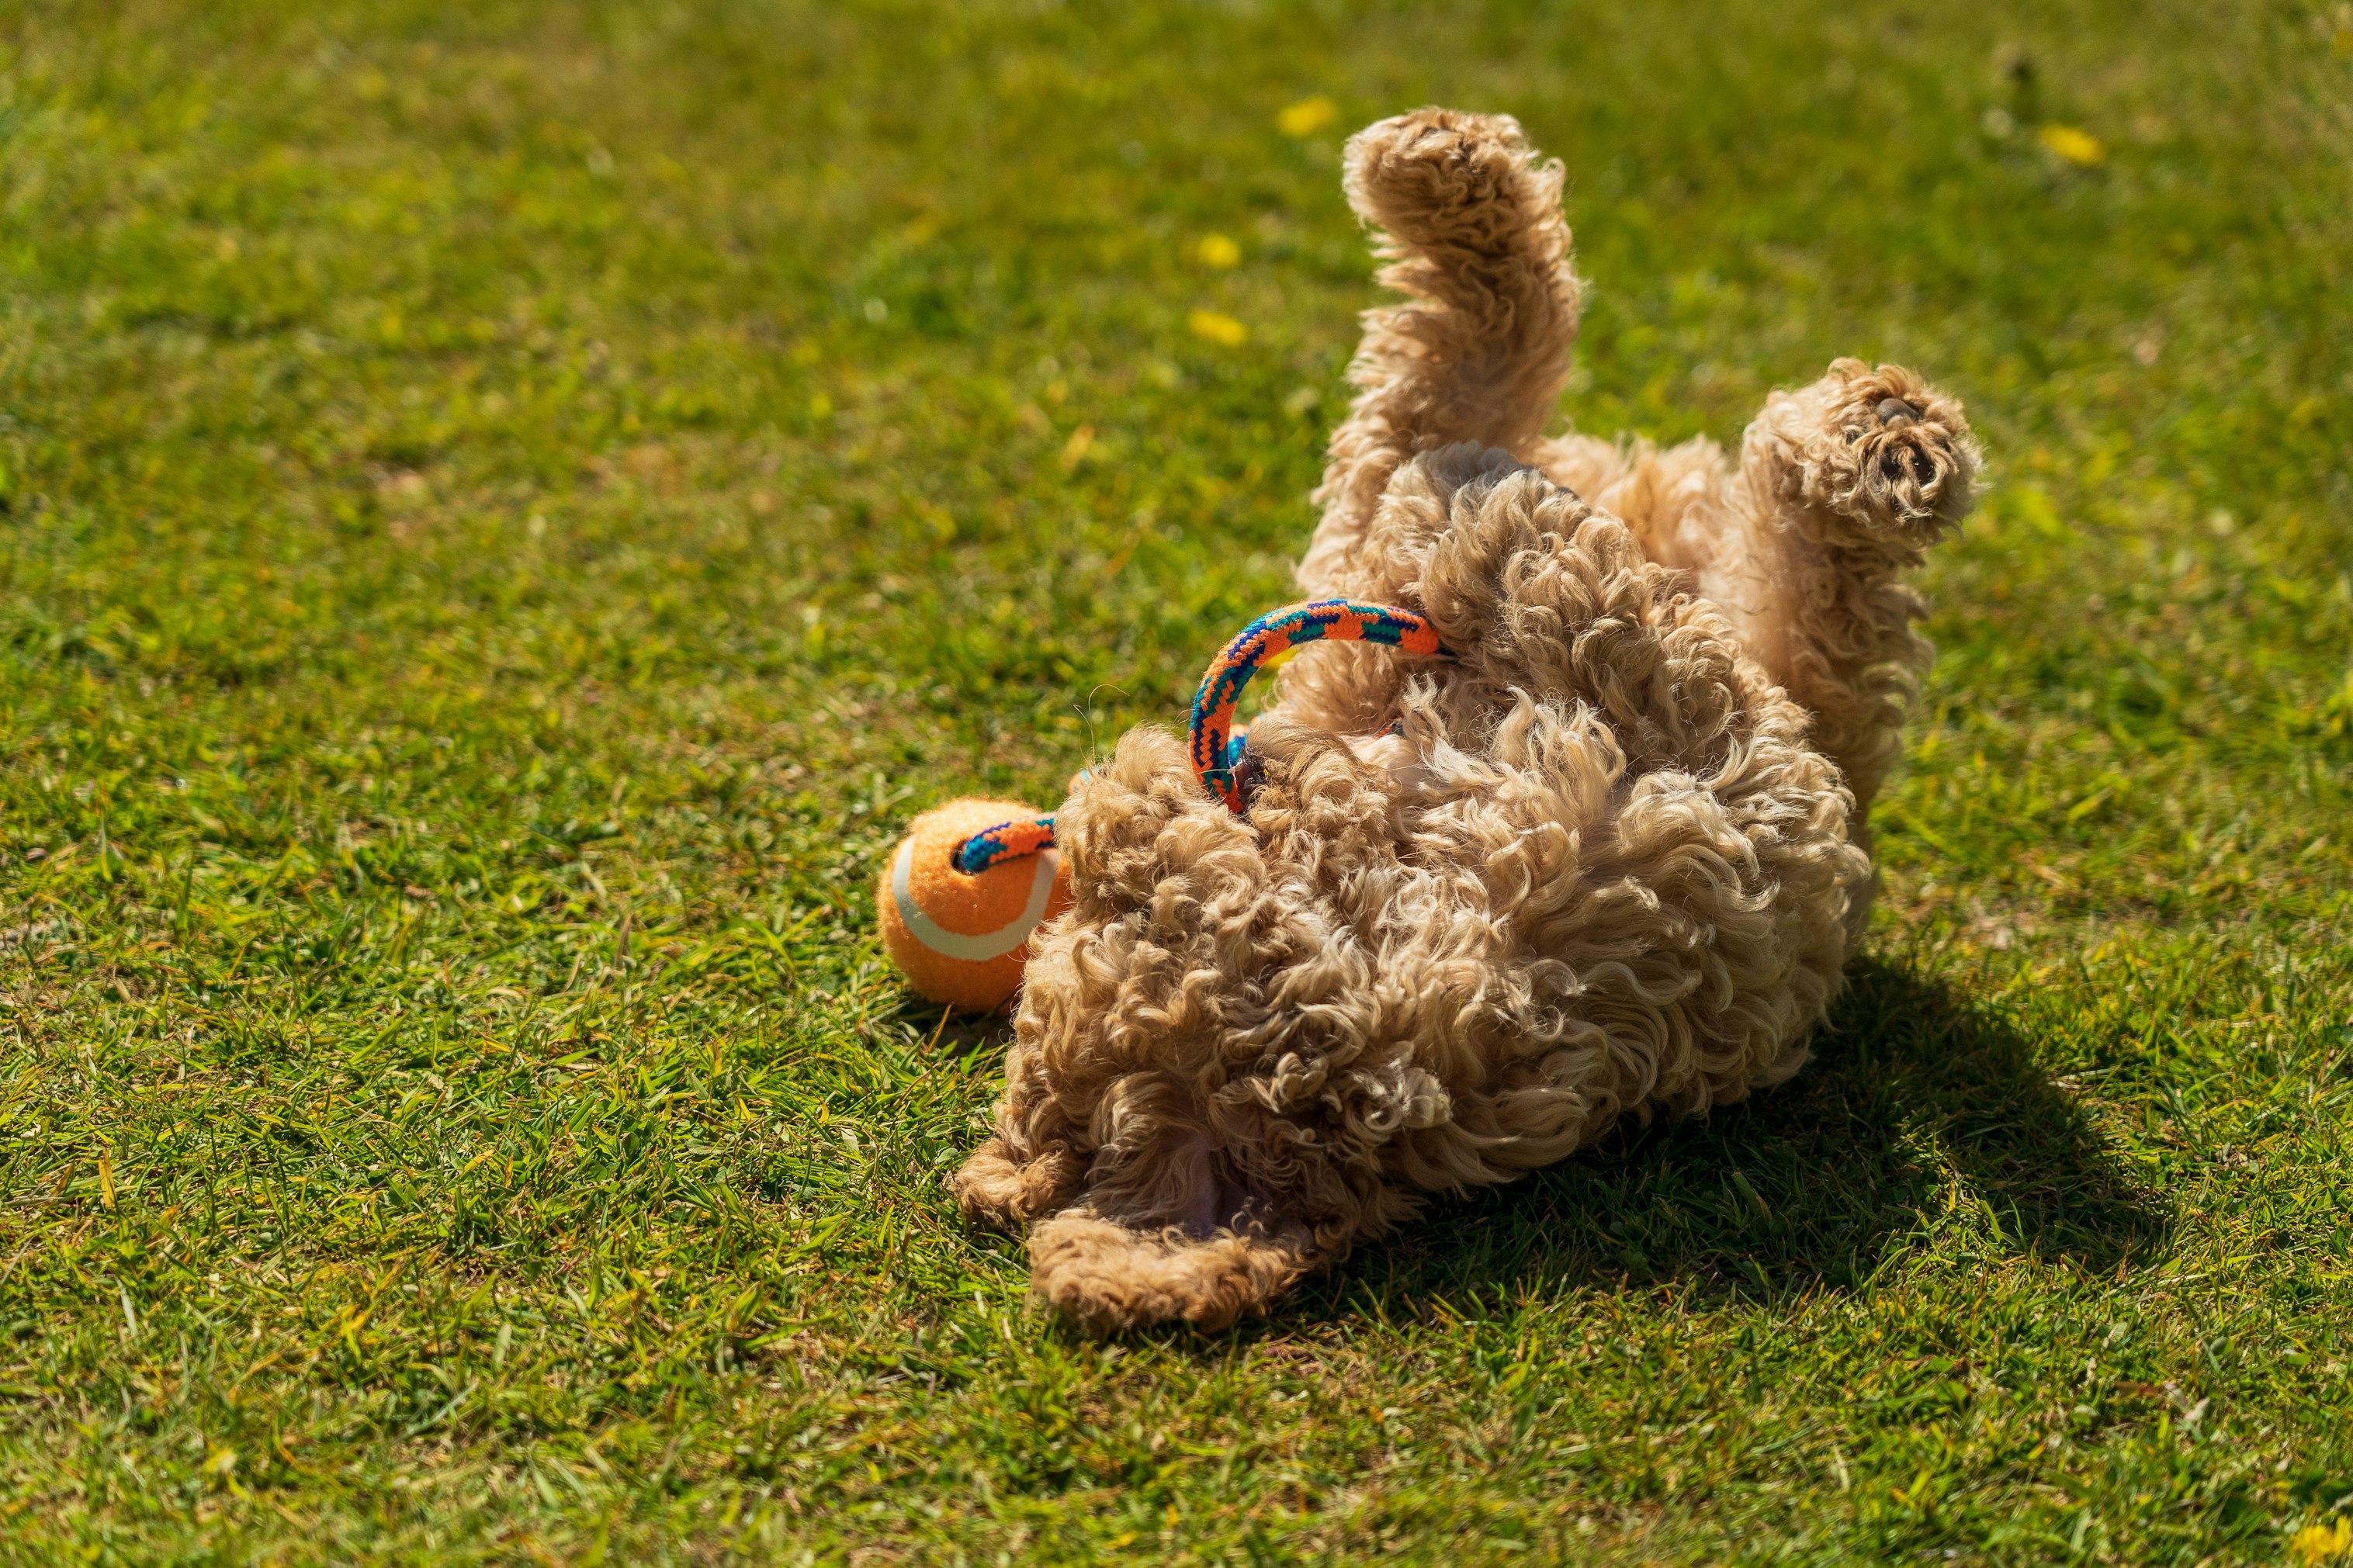 brown curly coated small dog with blue leash on green grass field during daytime